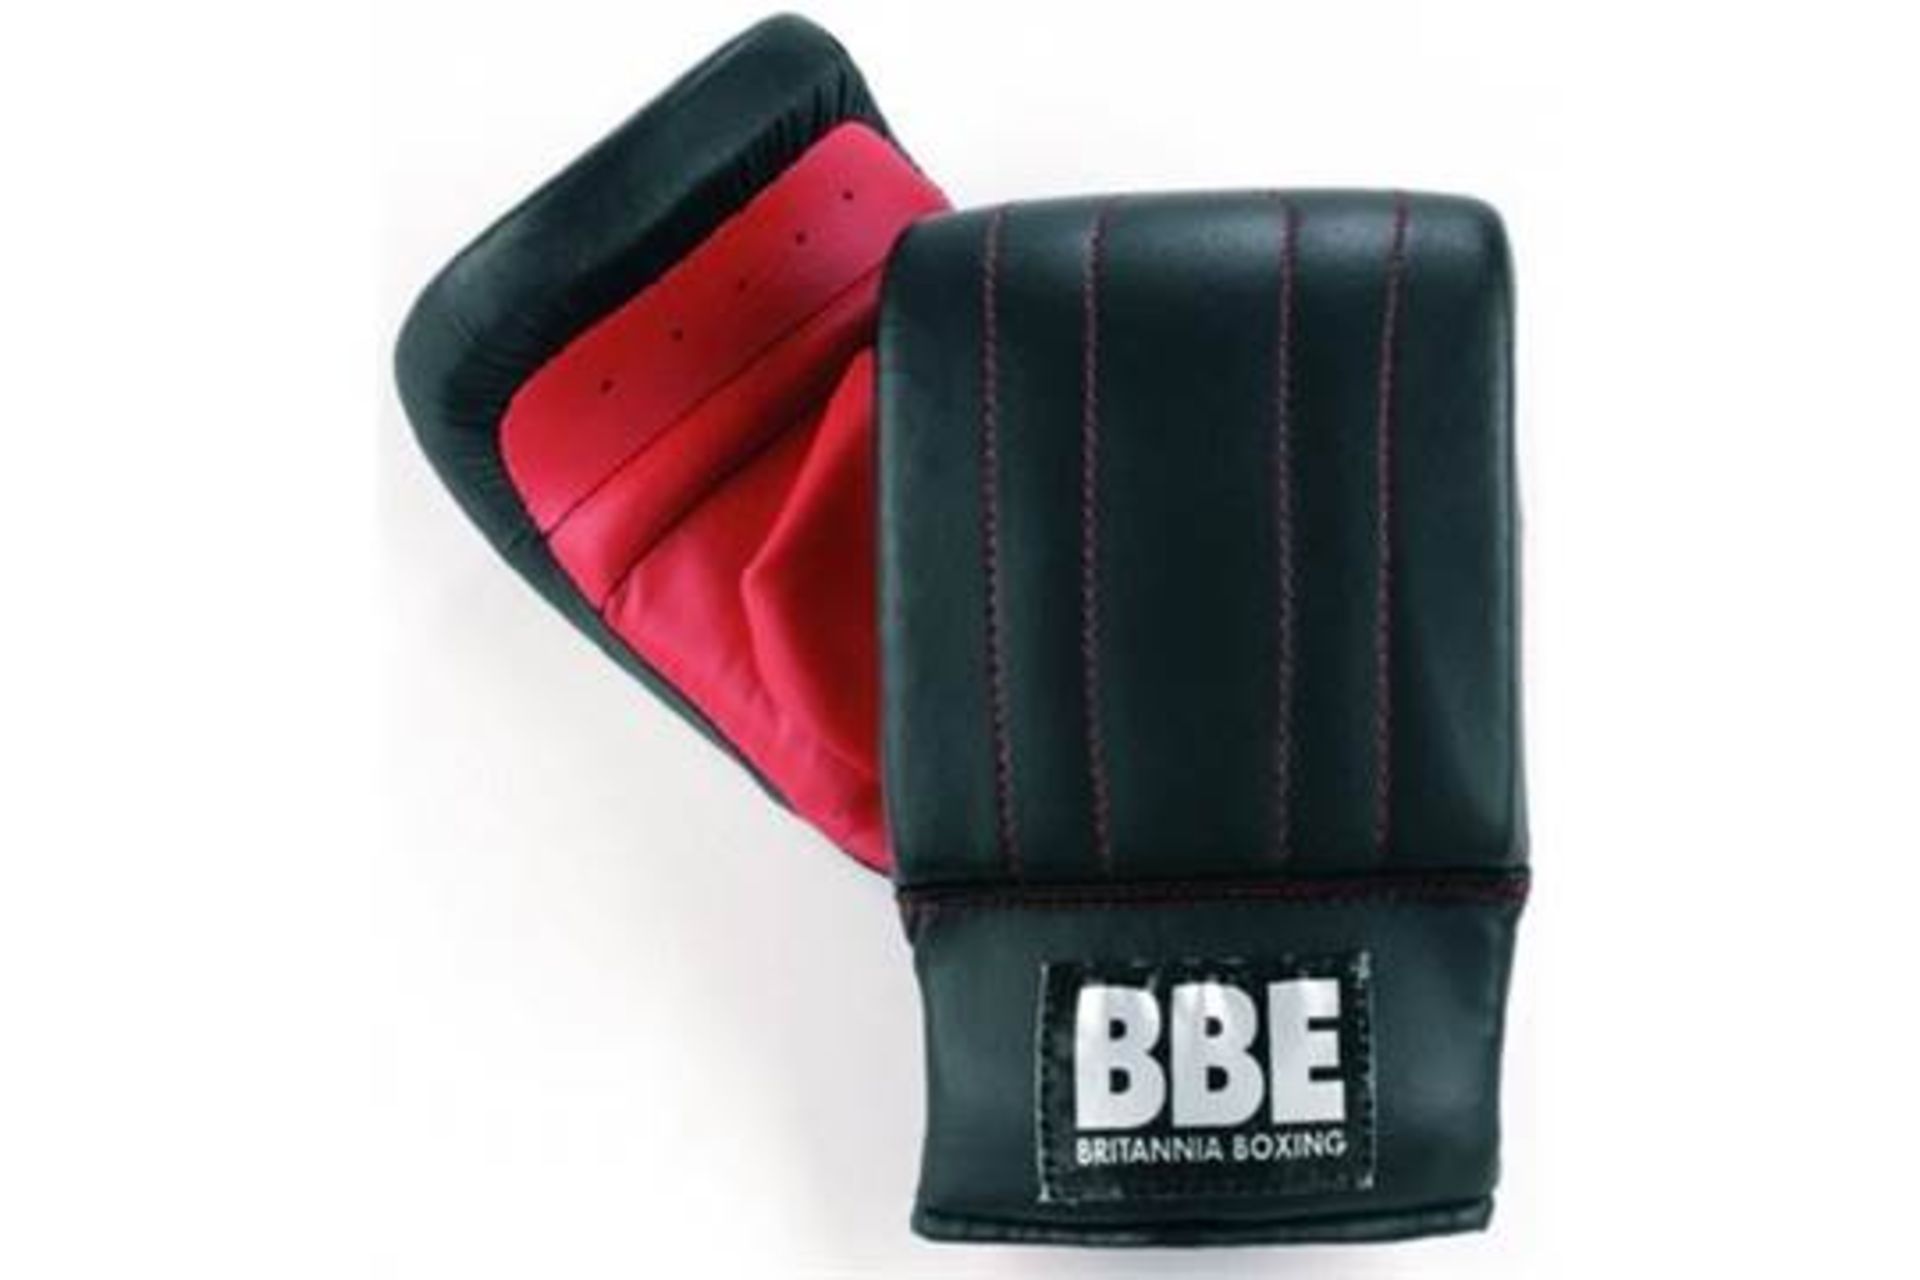 3 x Boxes of BBE Boxing Gloves - 125 per Box